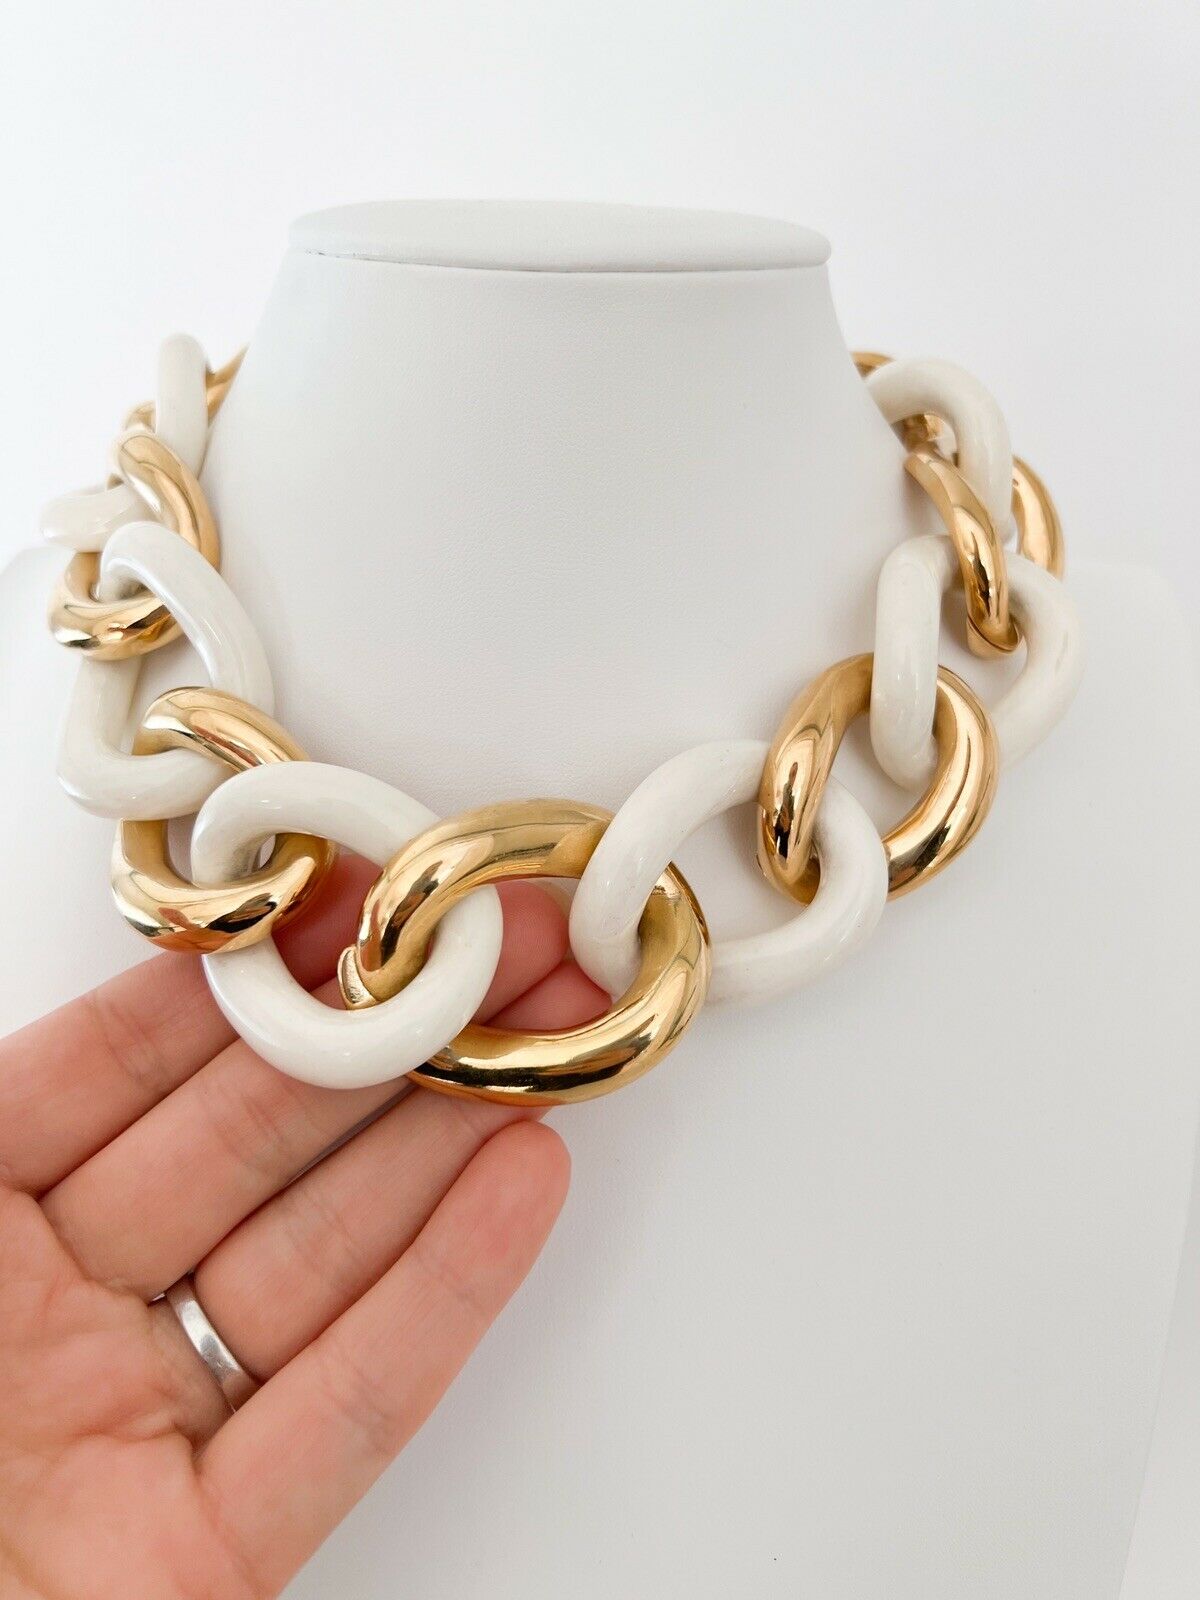 【SOLD OUT】Givenchy Vintage Gold Tone Choker Necklace Large Chain Link White